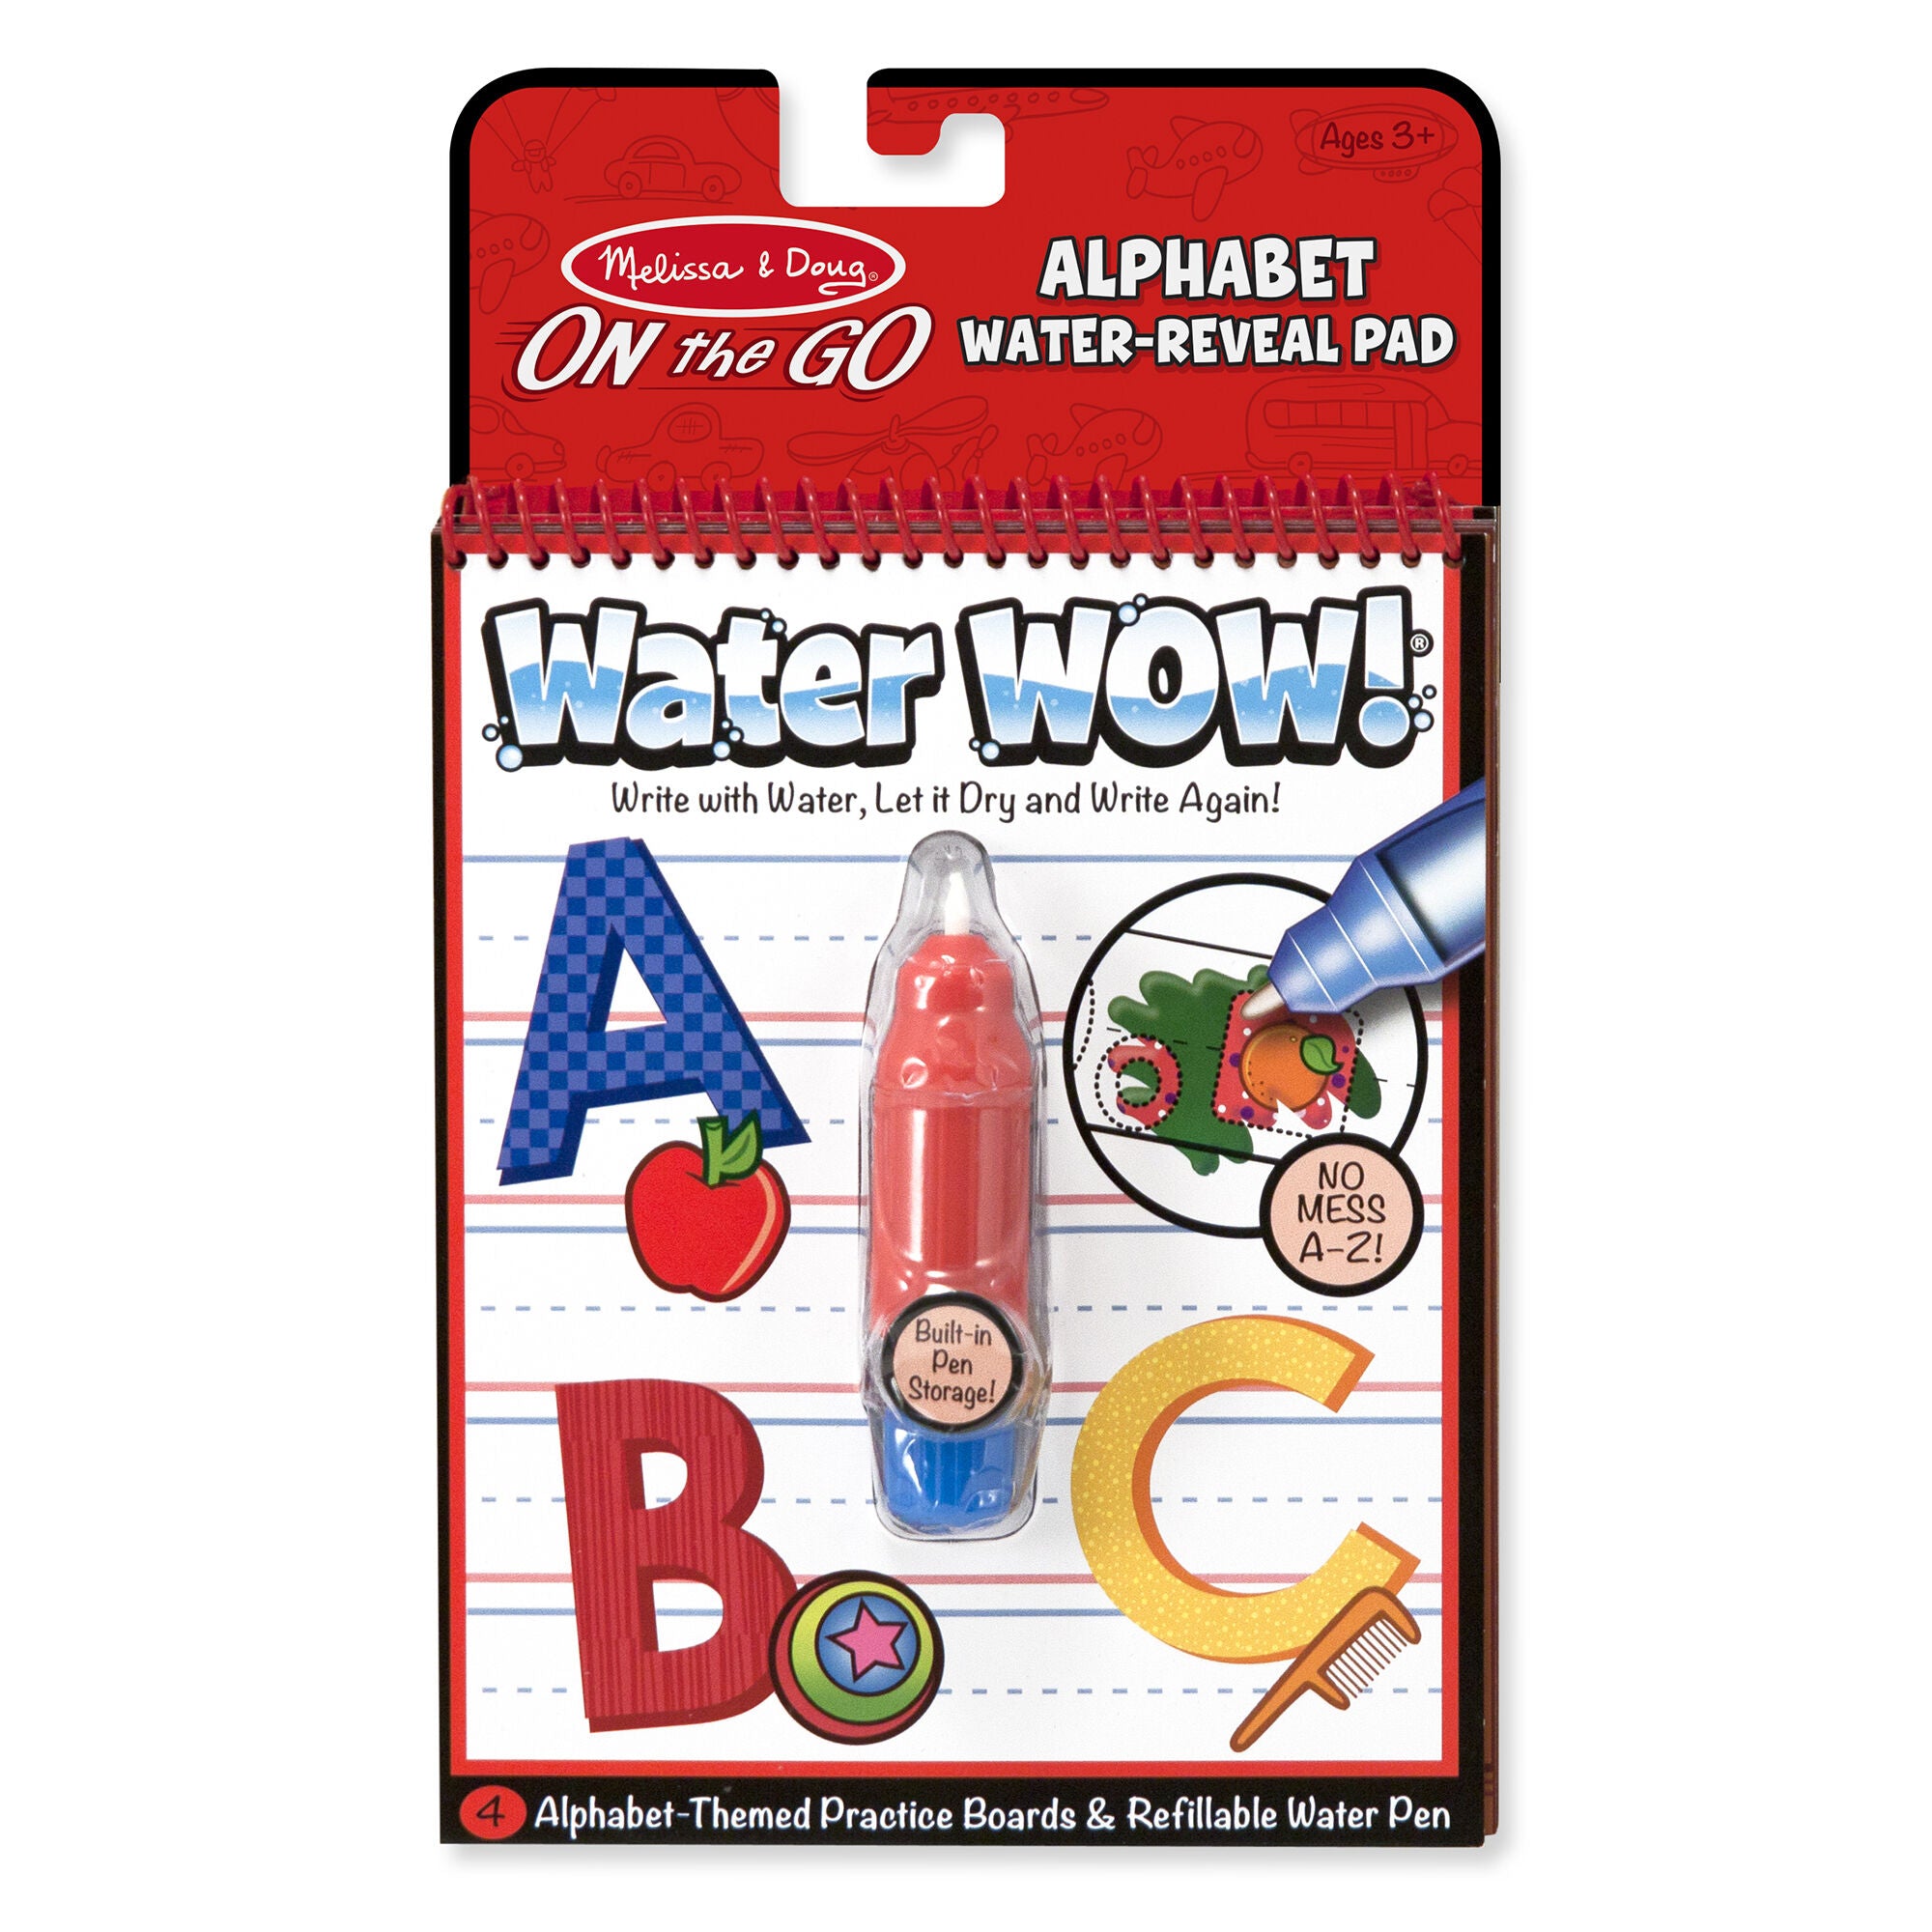 Melissa & Doug Water Wow! On The Go Water-Reveal Pad / Alphabet